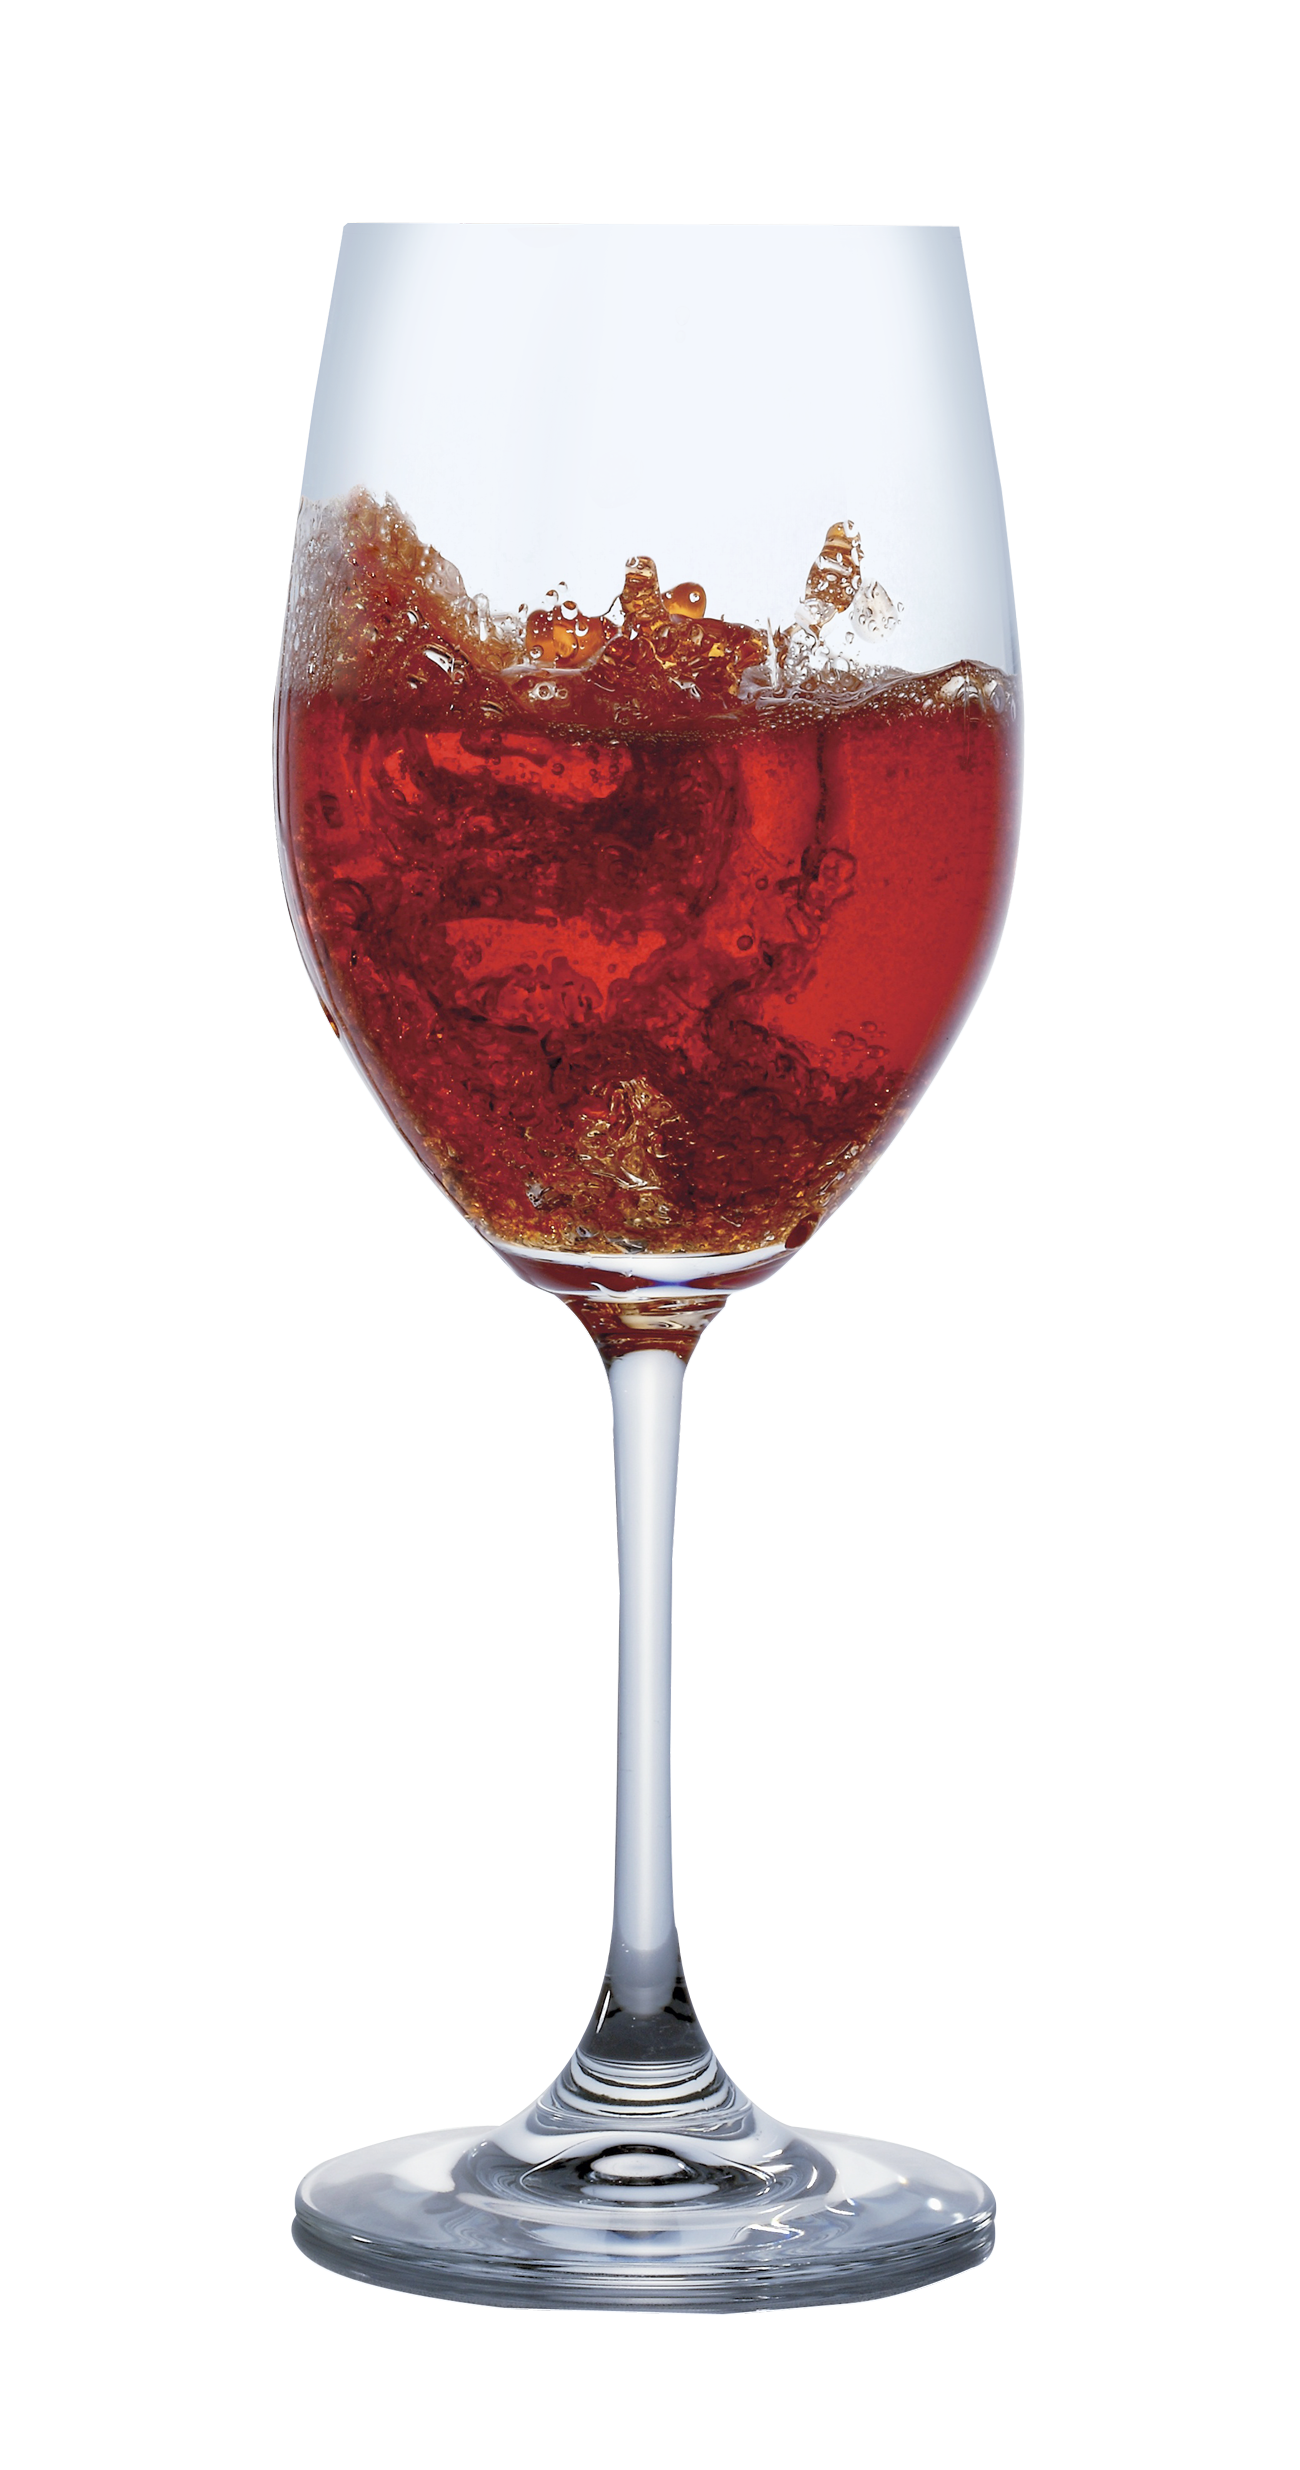 A Glass Of Red Liquid